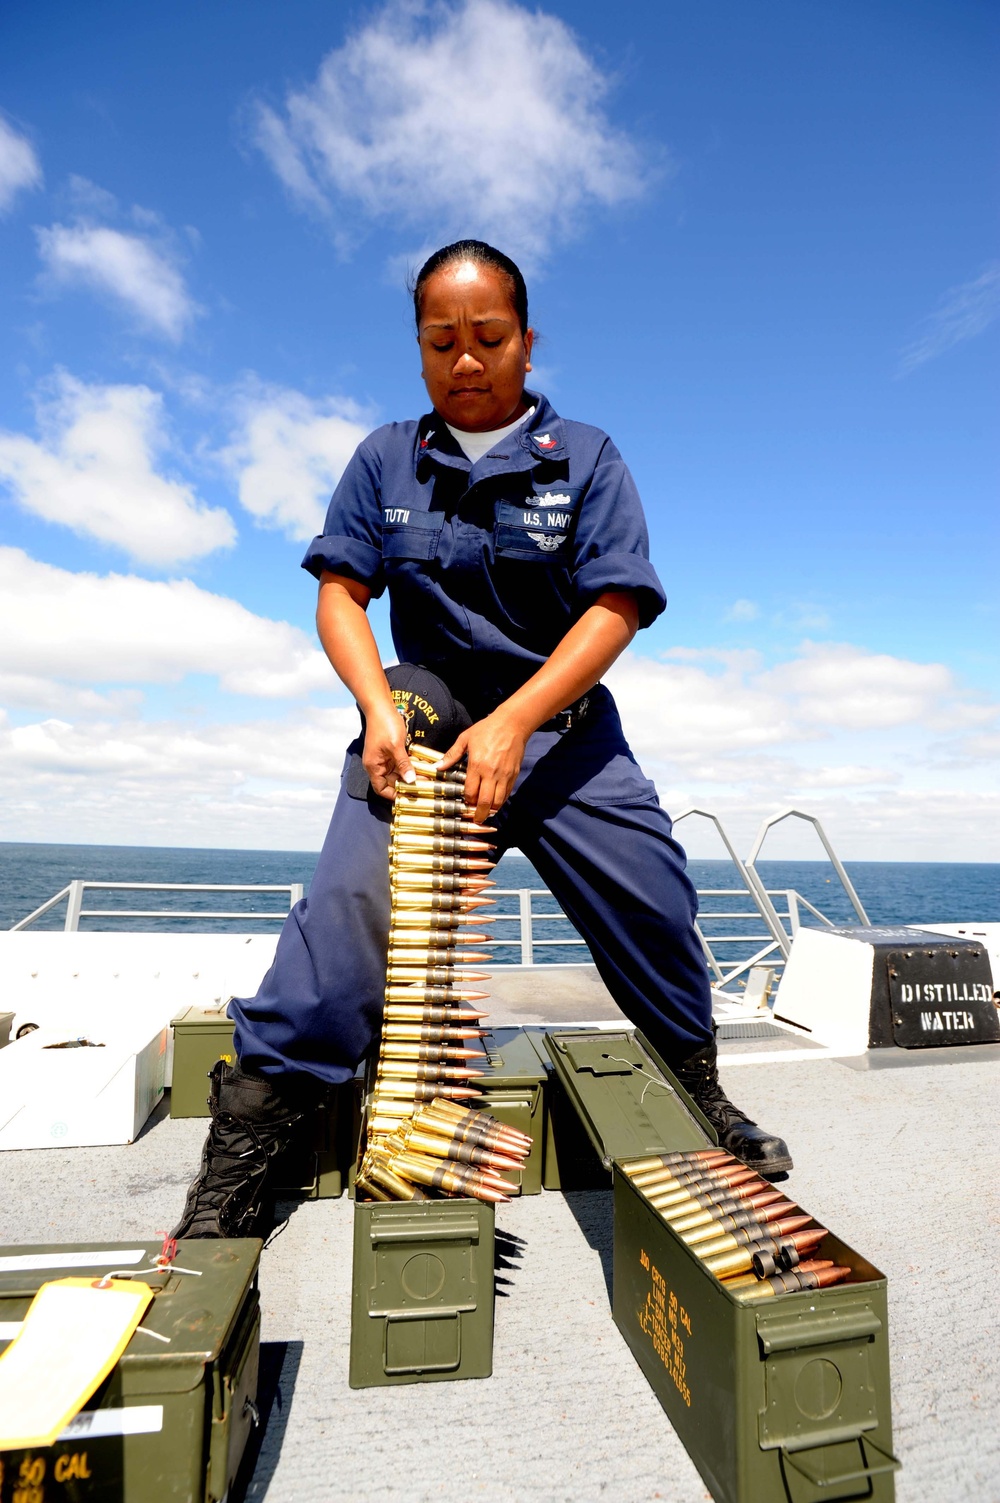 Precommissioning Unit New York sailors keep busy during sea trials